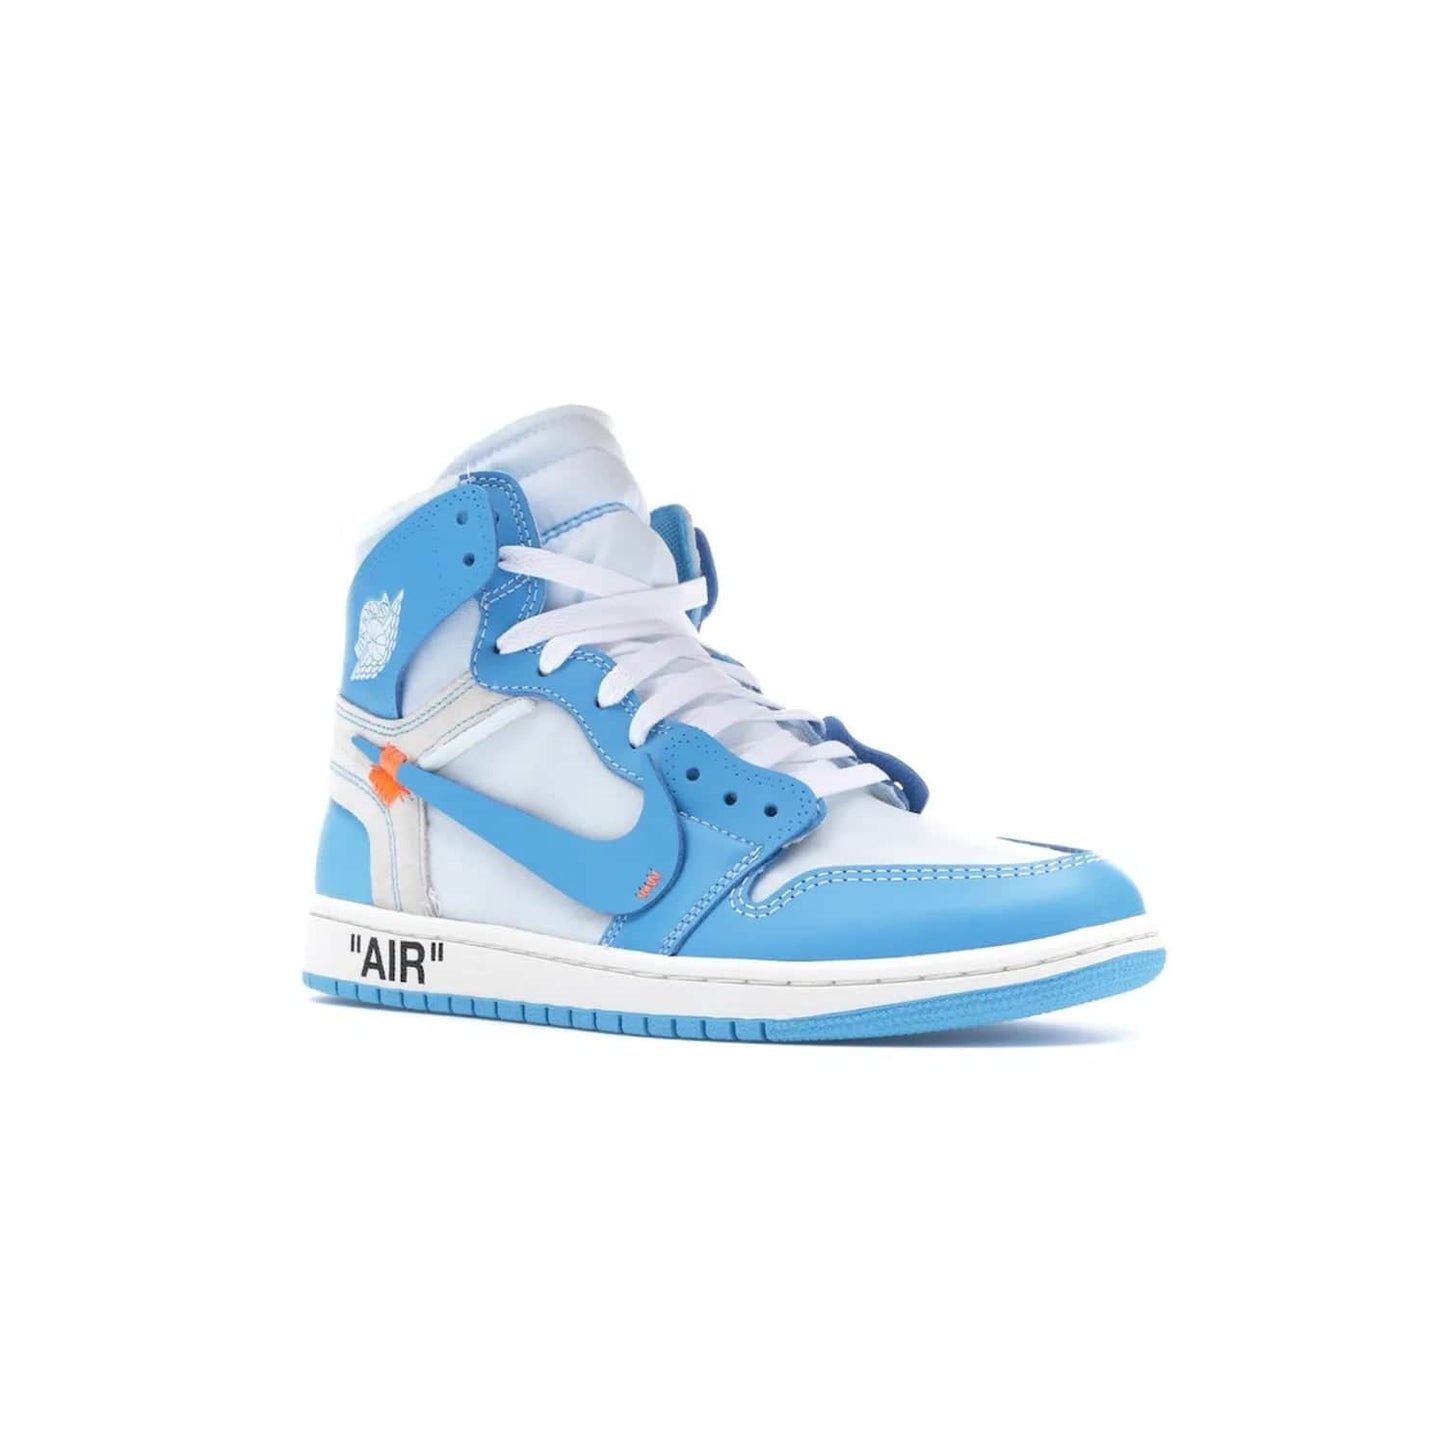 Jordan 1 Retro High Off-White University Blue - Image 5 - Only at www.BallersClubKickz.com - Classic Jordan 1 Retro High "Off-White UNC" sneakers meld style and comfort. Boasting deconstructed white and blue leather, Off-White detailing, and a white, dark powder blue and cone colorway, these sneakers are perfect for dressing up or down. Get the iconic Off-White Jordan 1's and upgrade your look.